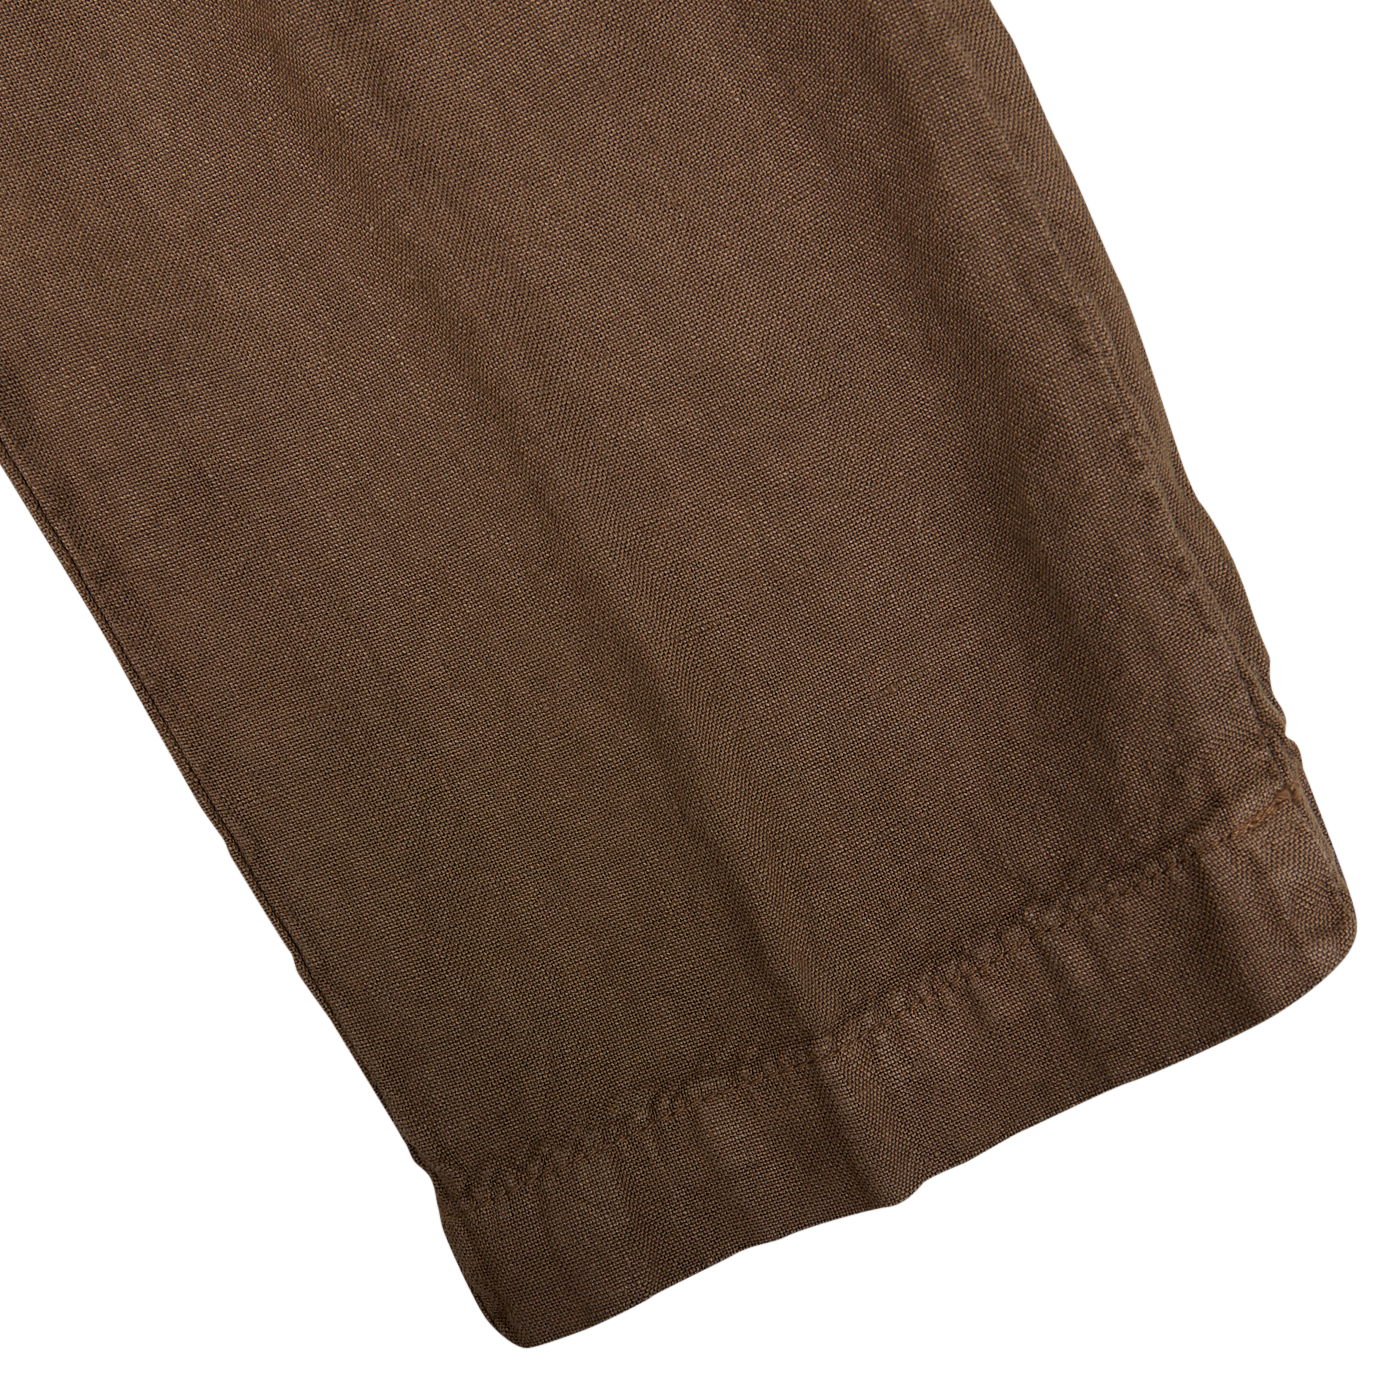 Close-up of a folded light brown Massimo Alba linen casual trousers made from pure linen canvas with visible texture.